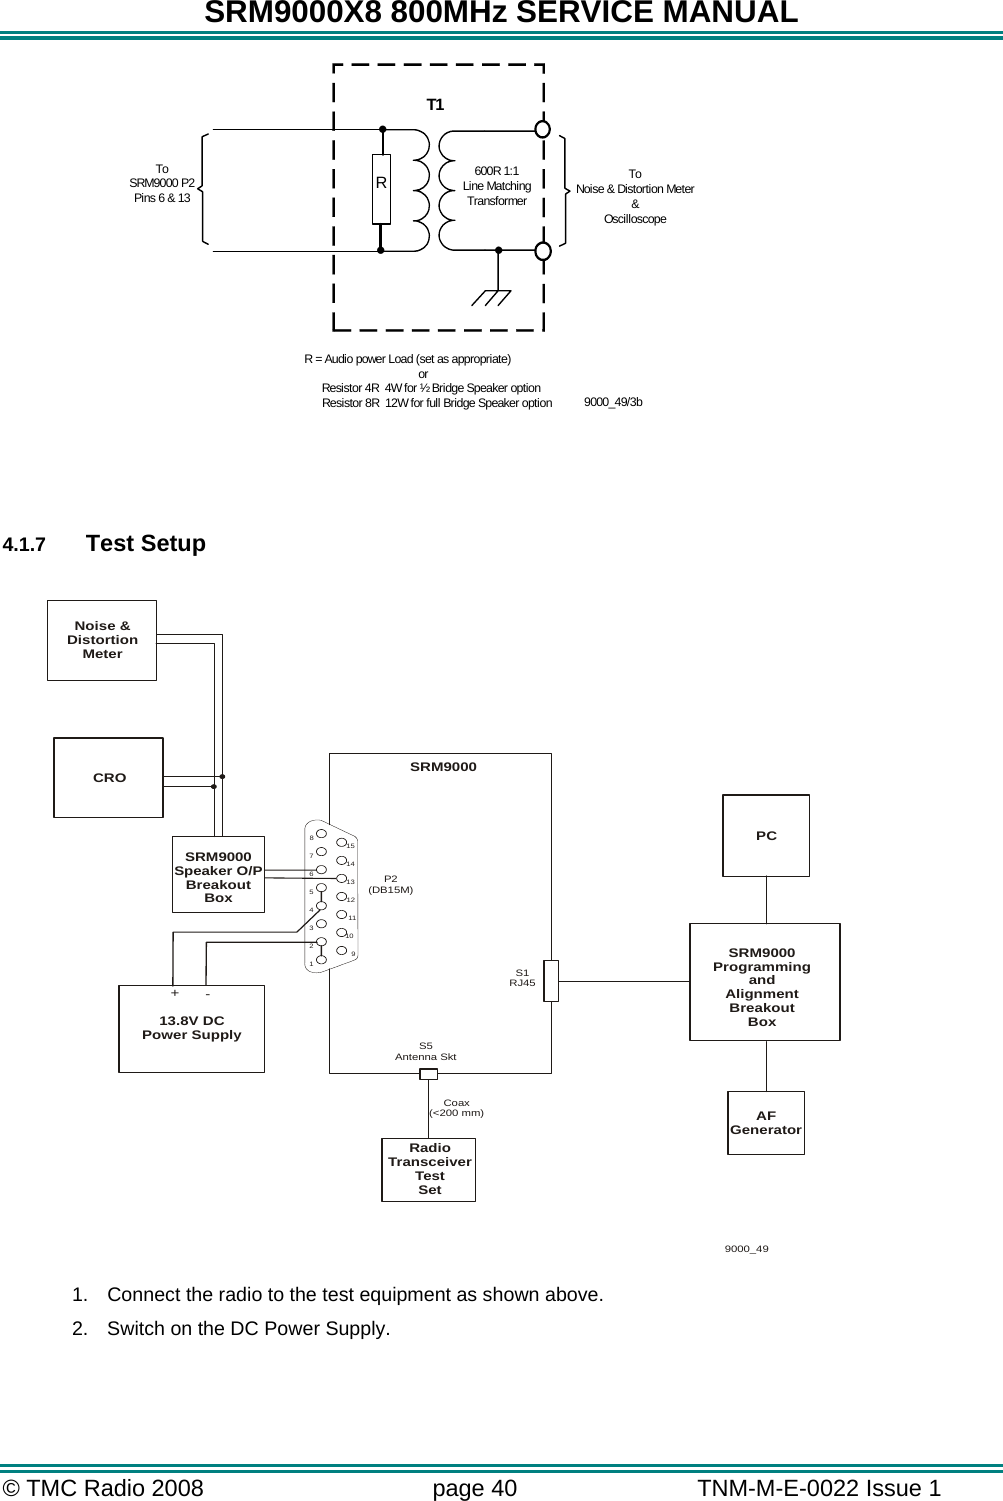 SRM9000X8 800MHz SERVICE MANUAL © TMC Radio 2008  page 40   TNM-M-E-0022 Issue 1   ...ToSRM9000 P2Pins 6 &amp; 13R = Audio power Load (set as appropriate)           or                Resistor 4R  4W for ½ Bridge Speaker option                    Resistor 8R  12W for full Bridge Speaker option600R 1:1Line MatchingTransformerToNoise &amp; Distortion Meter&amp;Oscilloscope9000_49/3bRT1    4.1.7  Test Setup                  1.  Connect the radio to the test equipment as shown above. 2.  Switch on the DC Power Supply.  765432181514131211109SRM9000P2(DB15M)PCSRM9000ProgrammingandAlignmentBreakoutBoxS5Antenna SktS1RJ45AFGenerator13.8V DCPower SupplyCRO9000_49+-RadioTransceiverTestSetNoise &amp;DistortionMeterSRM9000Speaker O/PBreakoutBoxCoax(&lt;200 mm)